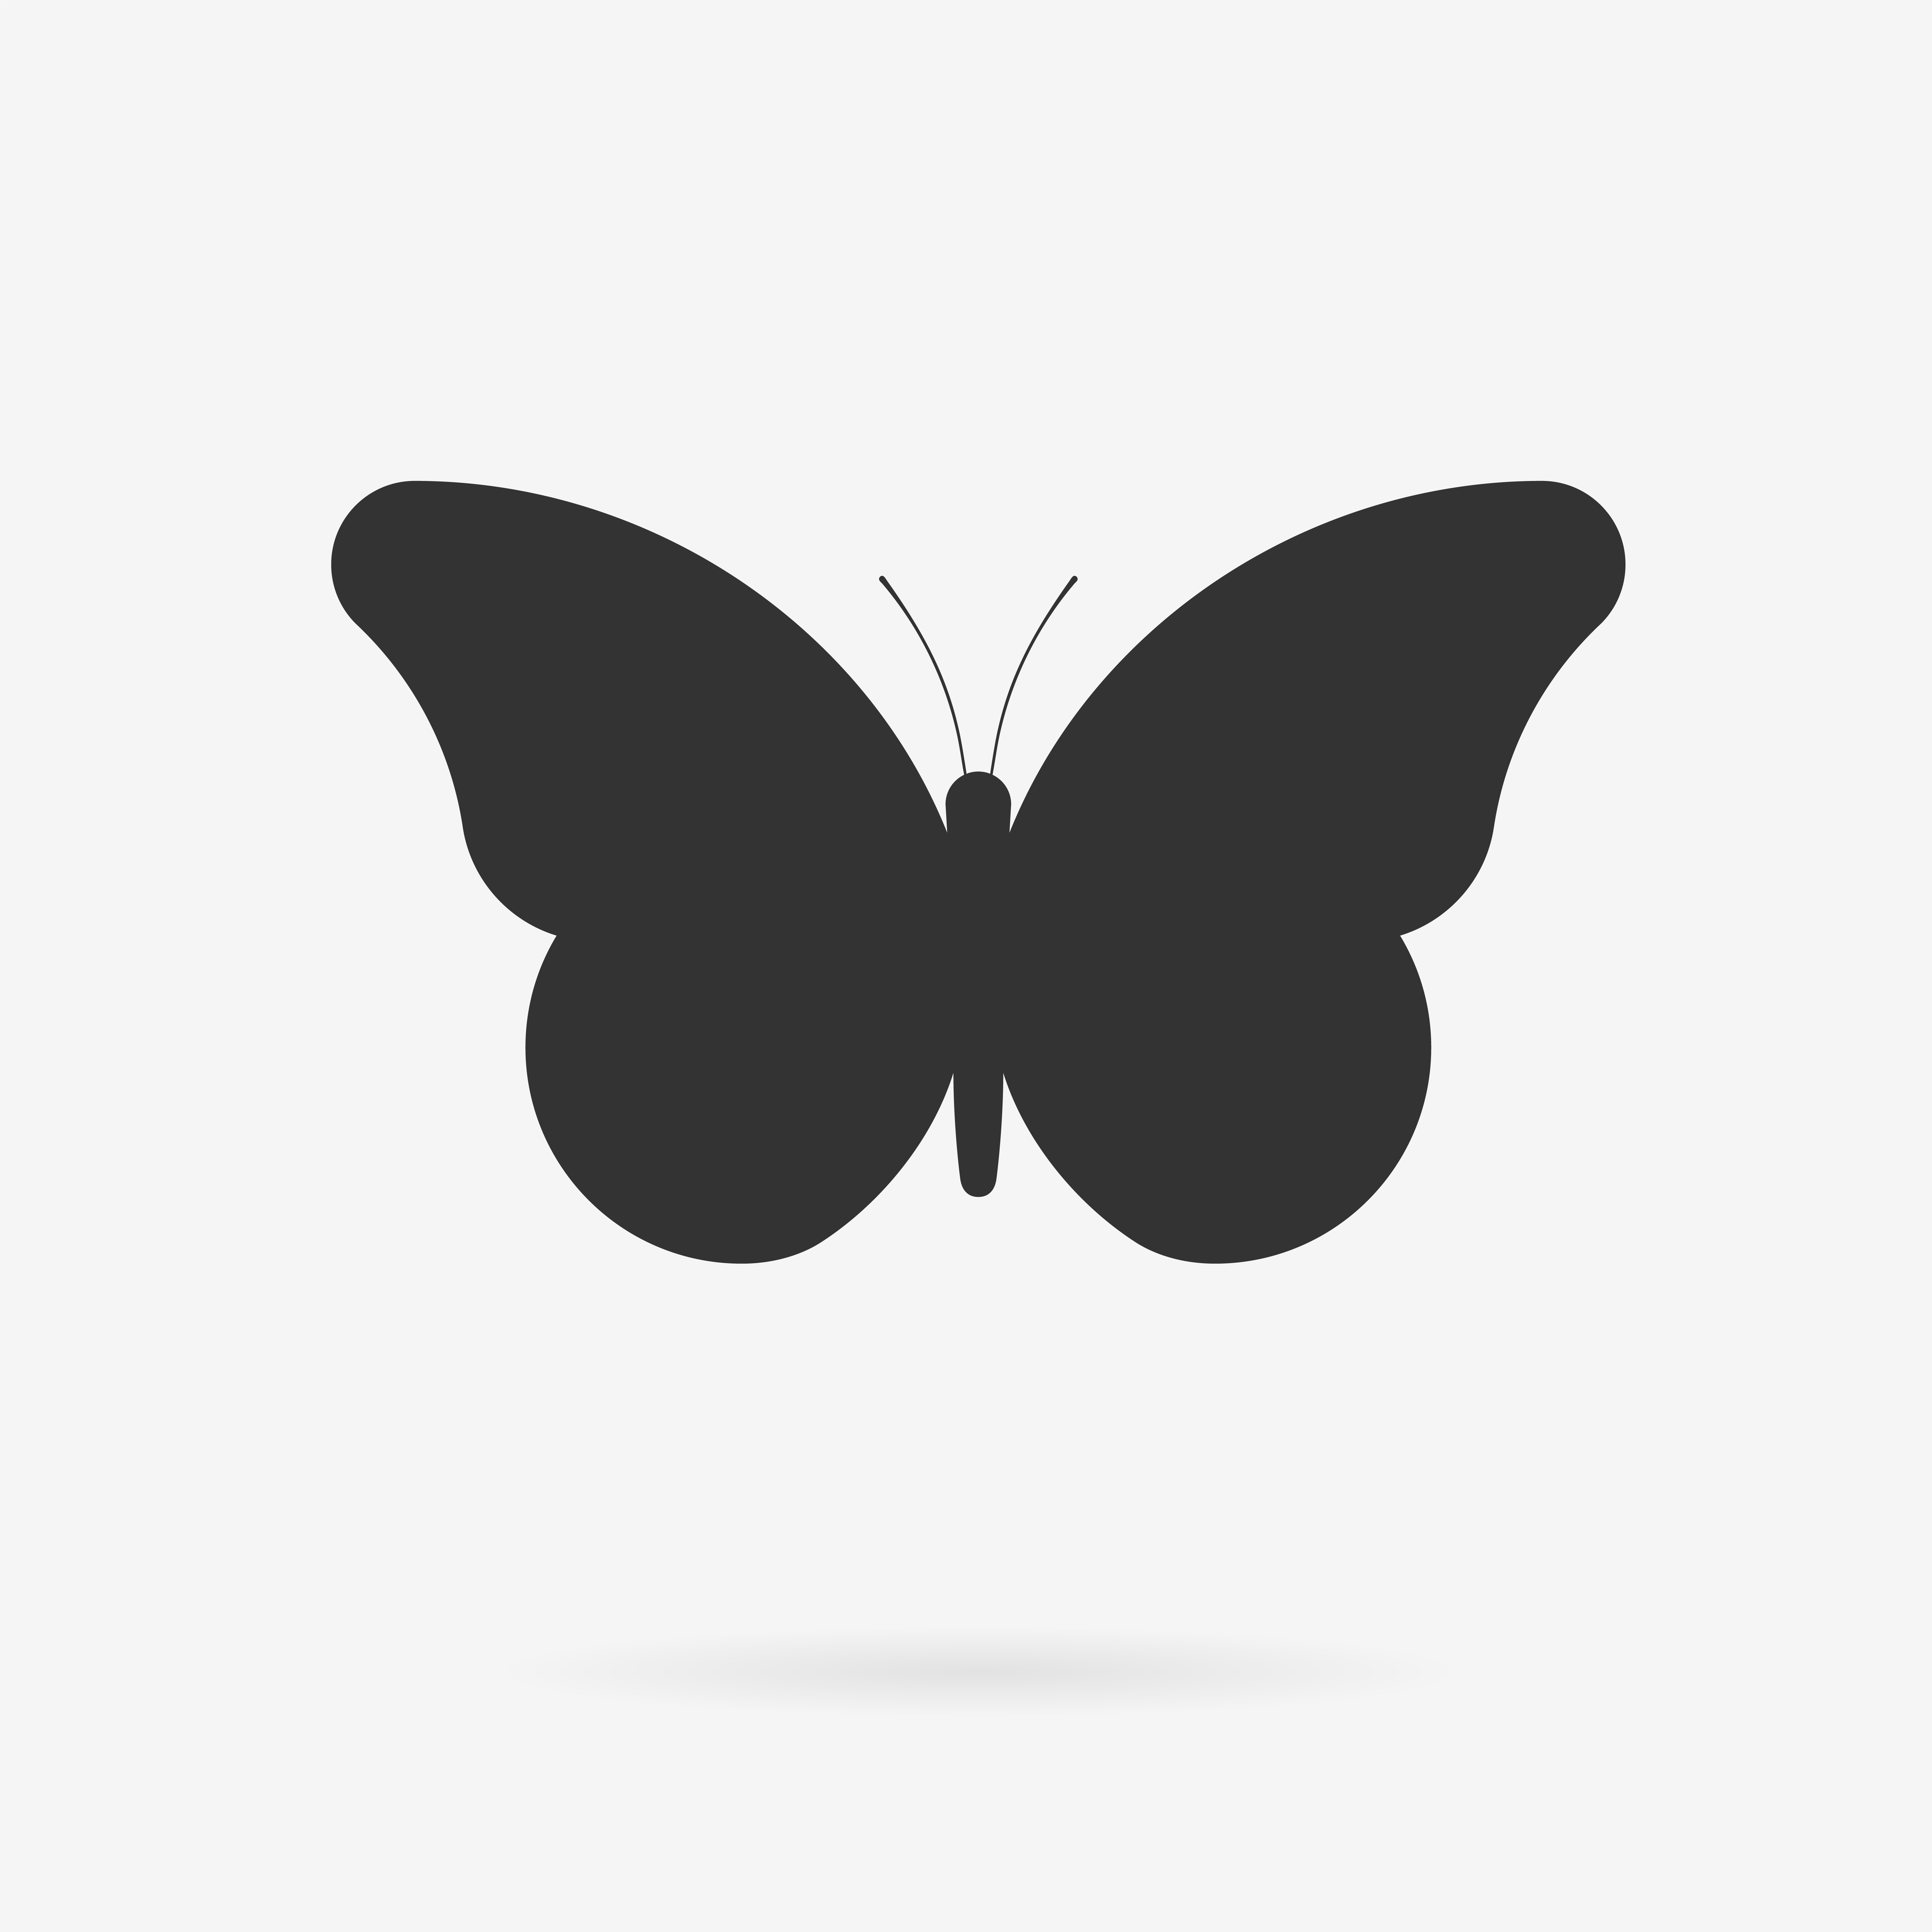 Download Butterfly Icon 270425 - Download Free Vectors, Clipart ...